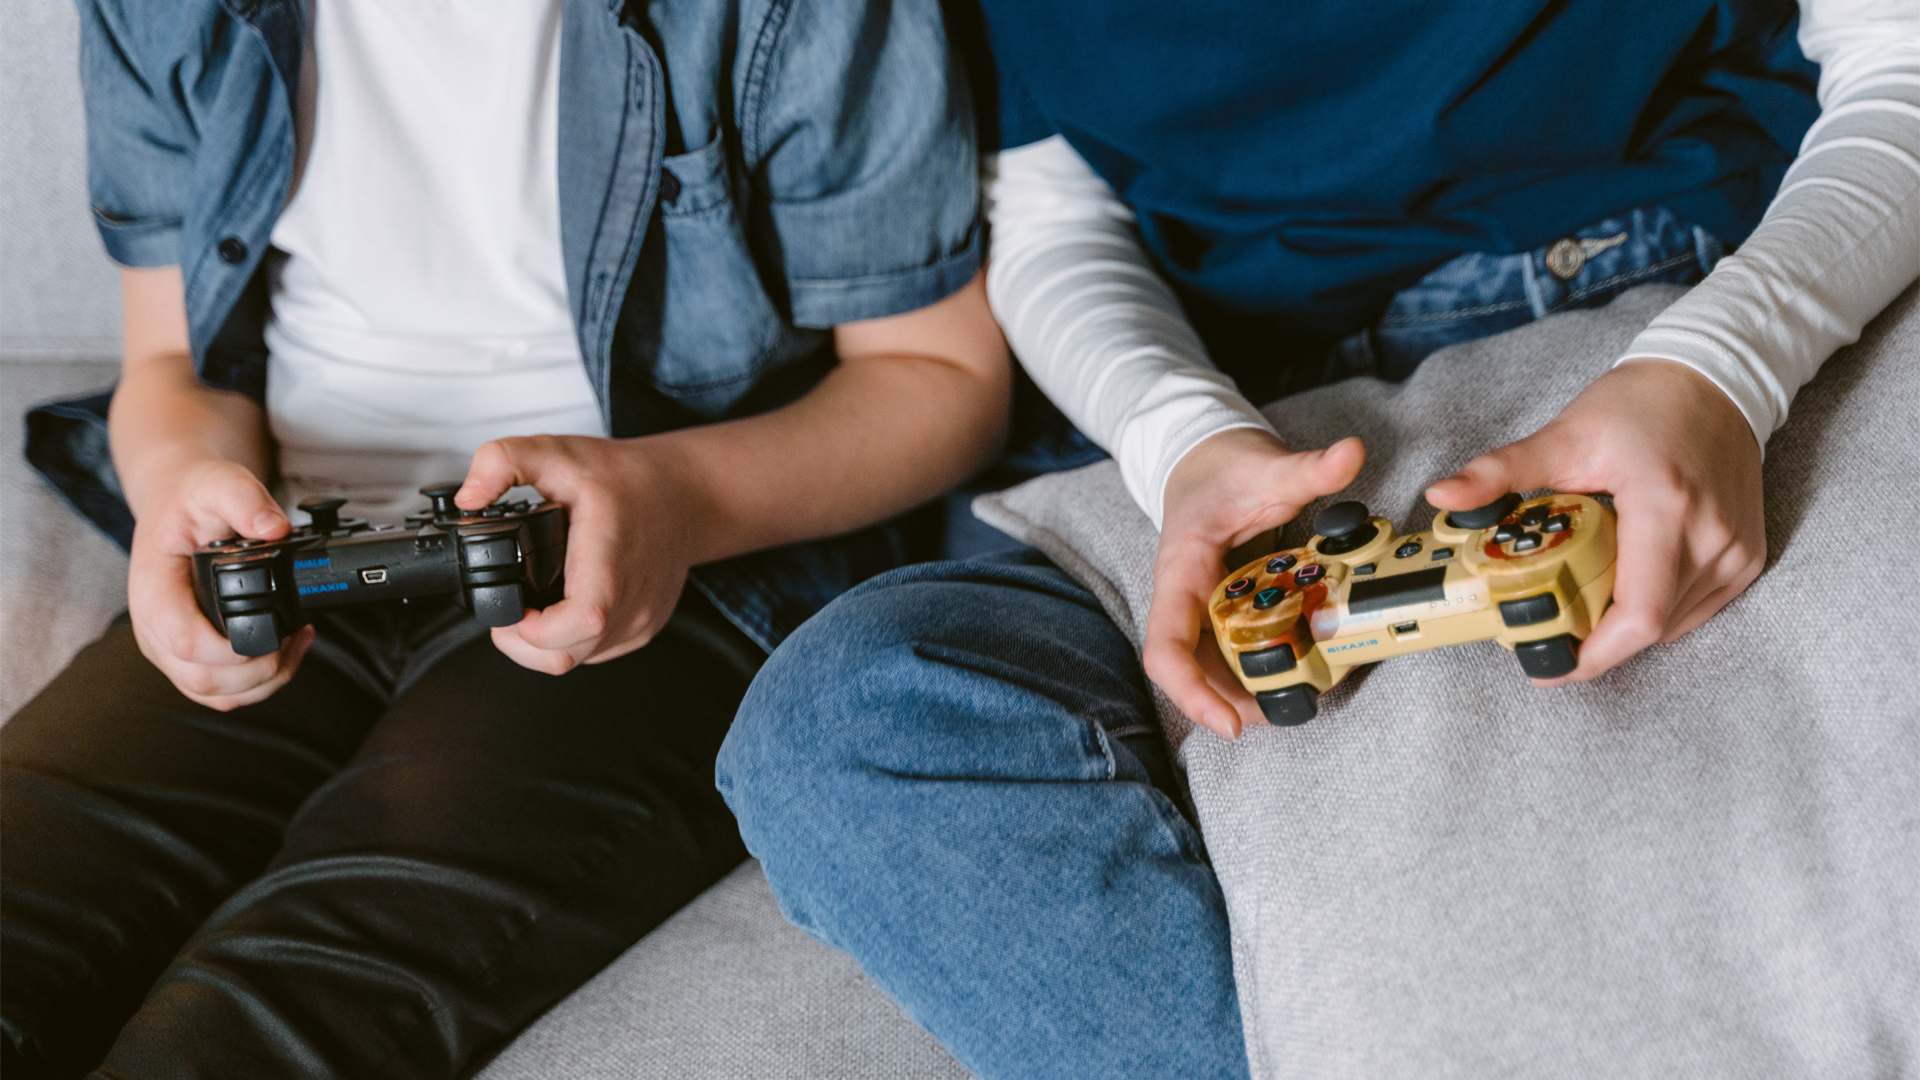 Ways to Wean Your Child Off Video Games